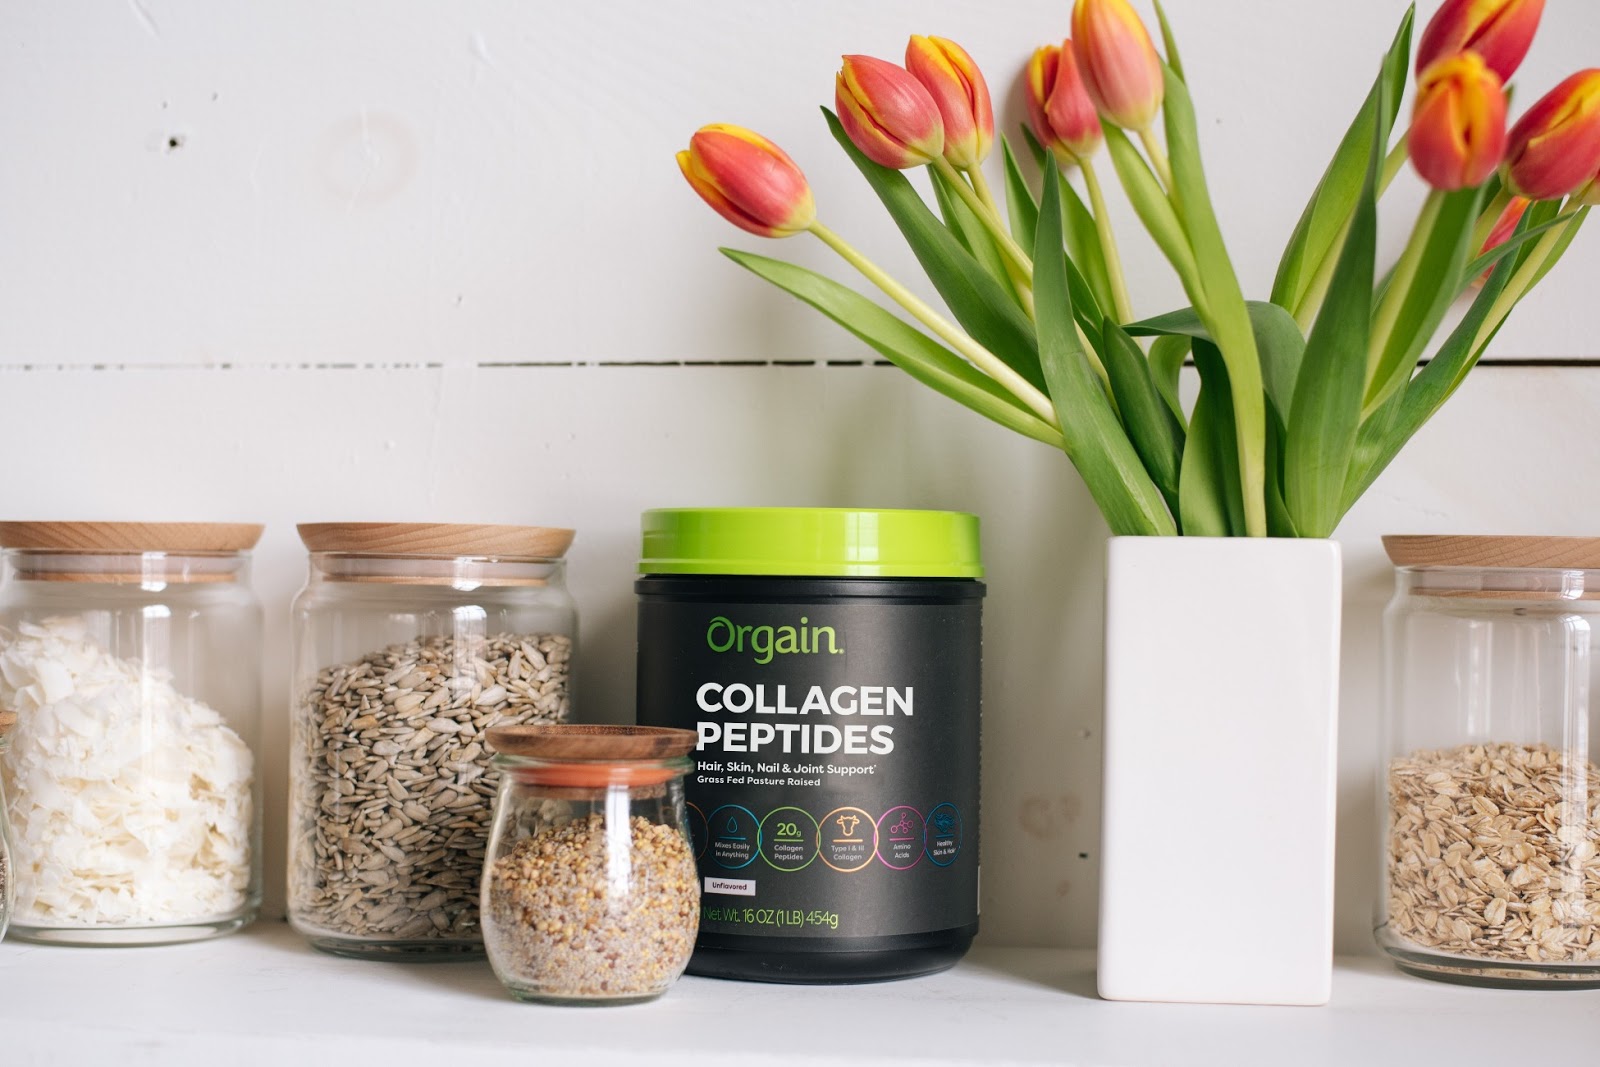 Hydrolyzed Collagen: What Is It and What are the Benefits?